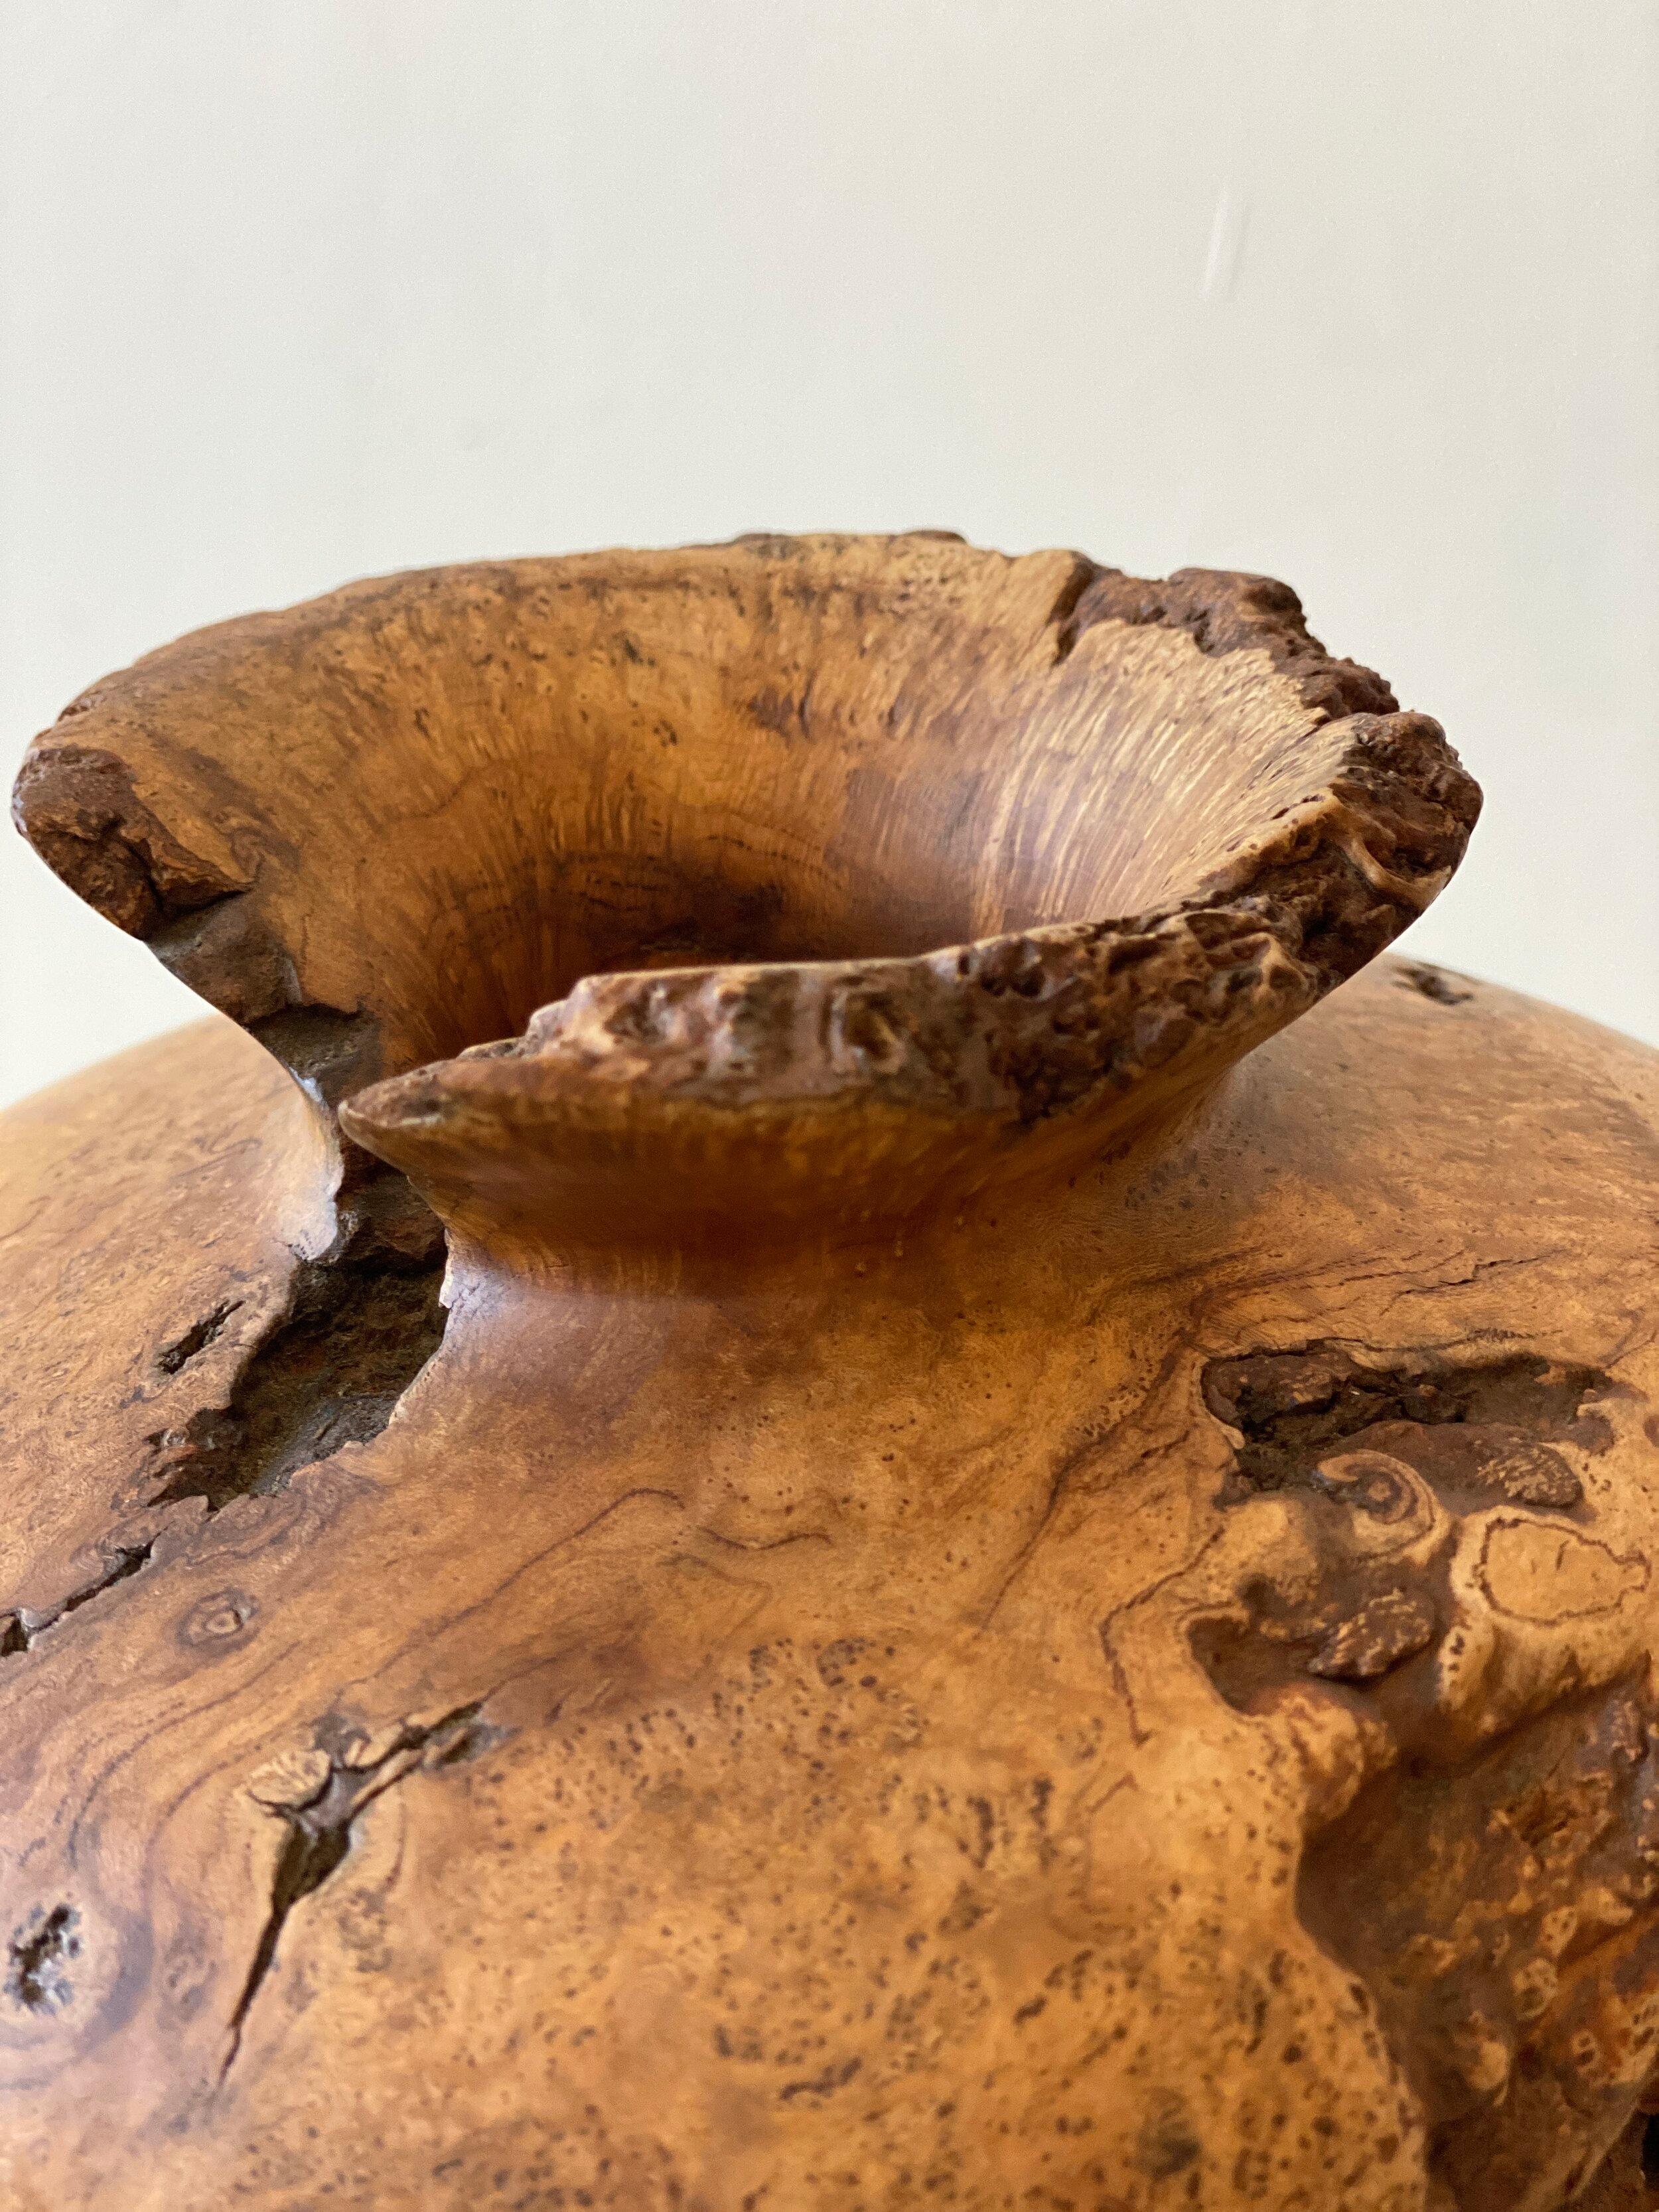 Melvin Lindquist Sculptural Turned Cherry Burl Wood Vase, Signed and Dated 1978 For Sale 1